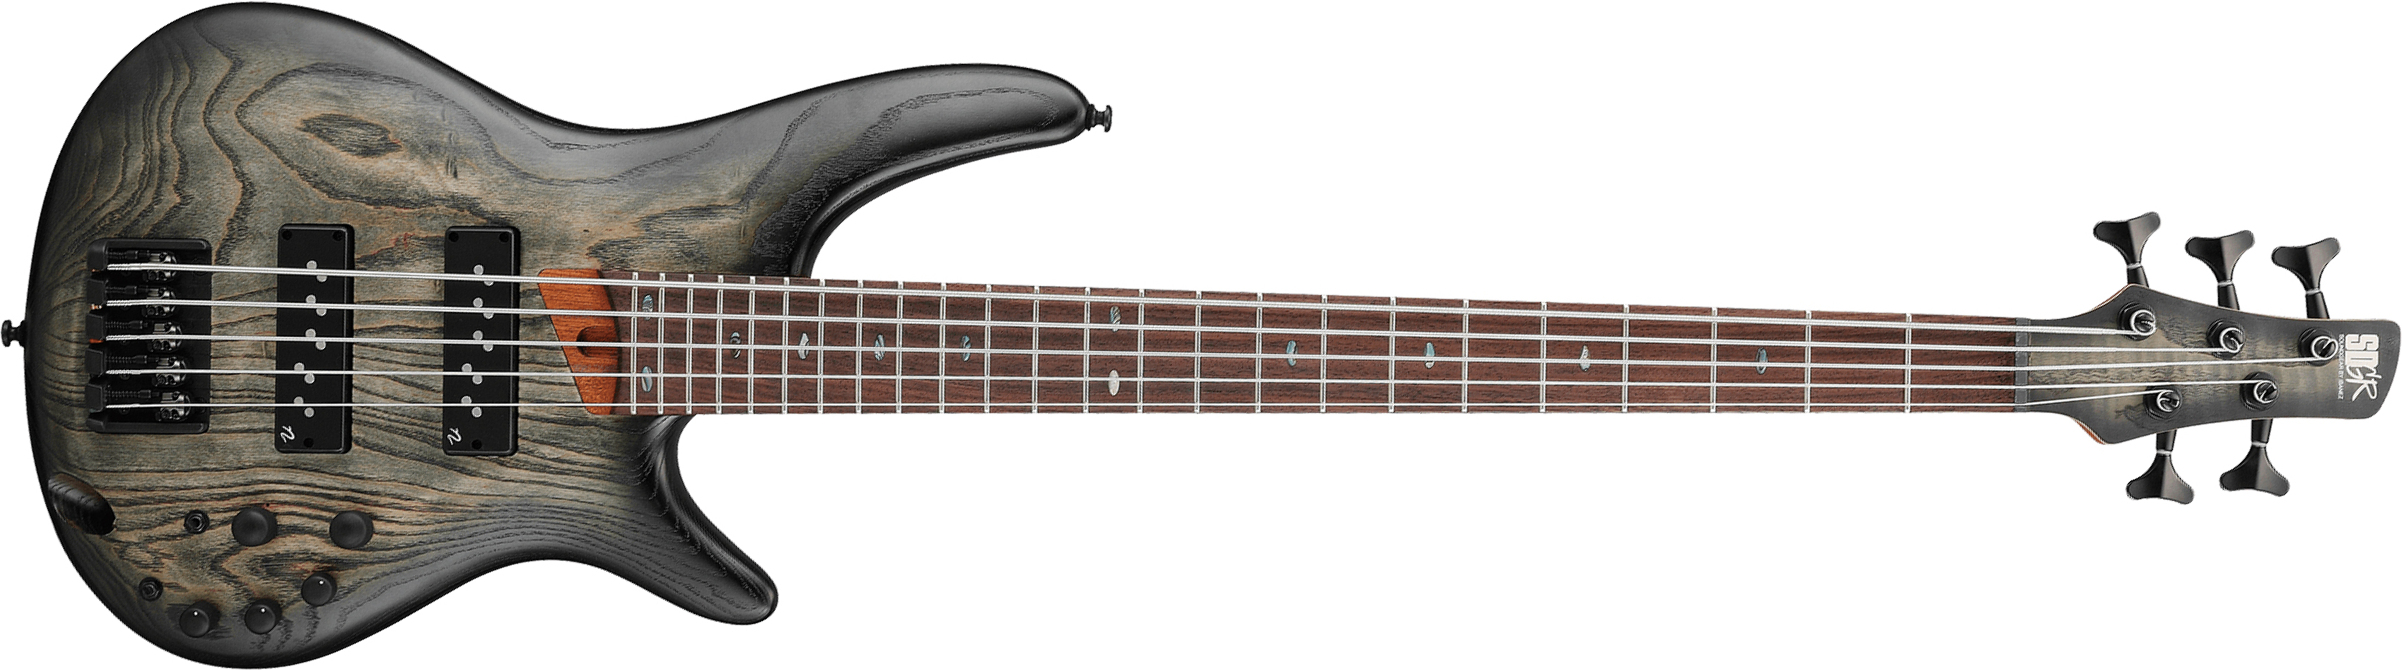 Ibanez Sr605e Ctf Standard 5c Active Rw - Black Stained Burst - Solid body electric bass - Main picture